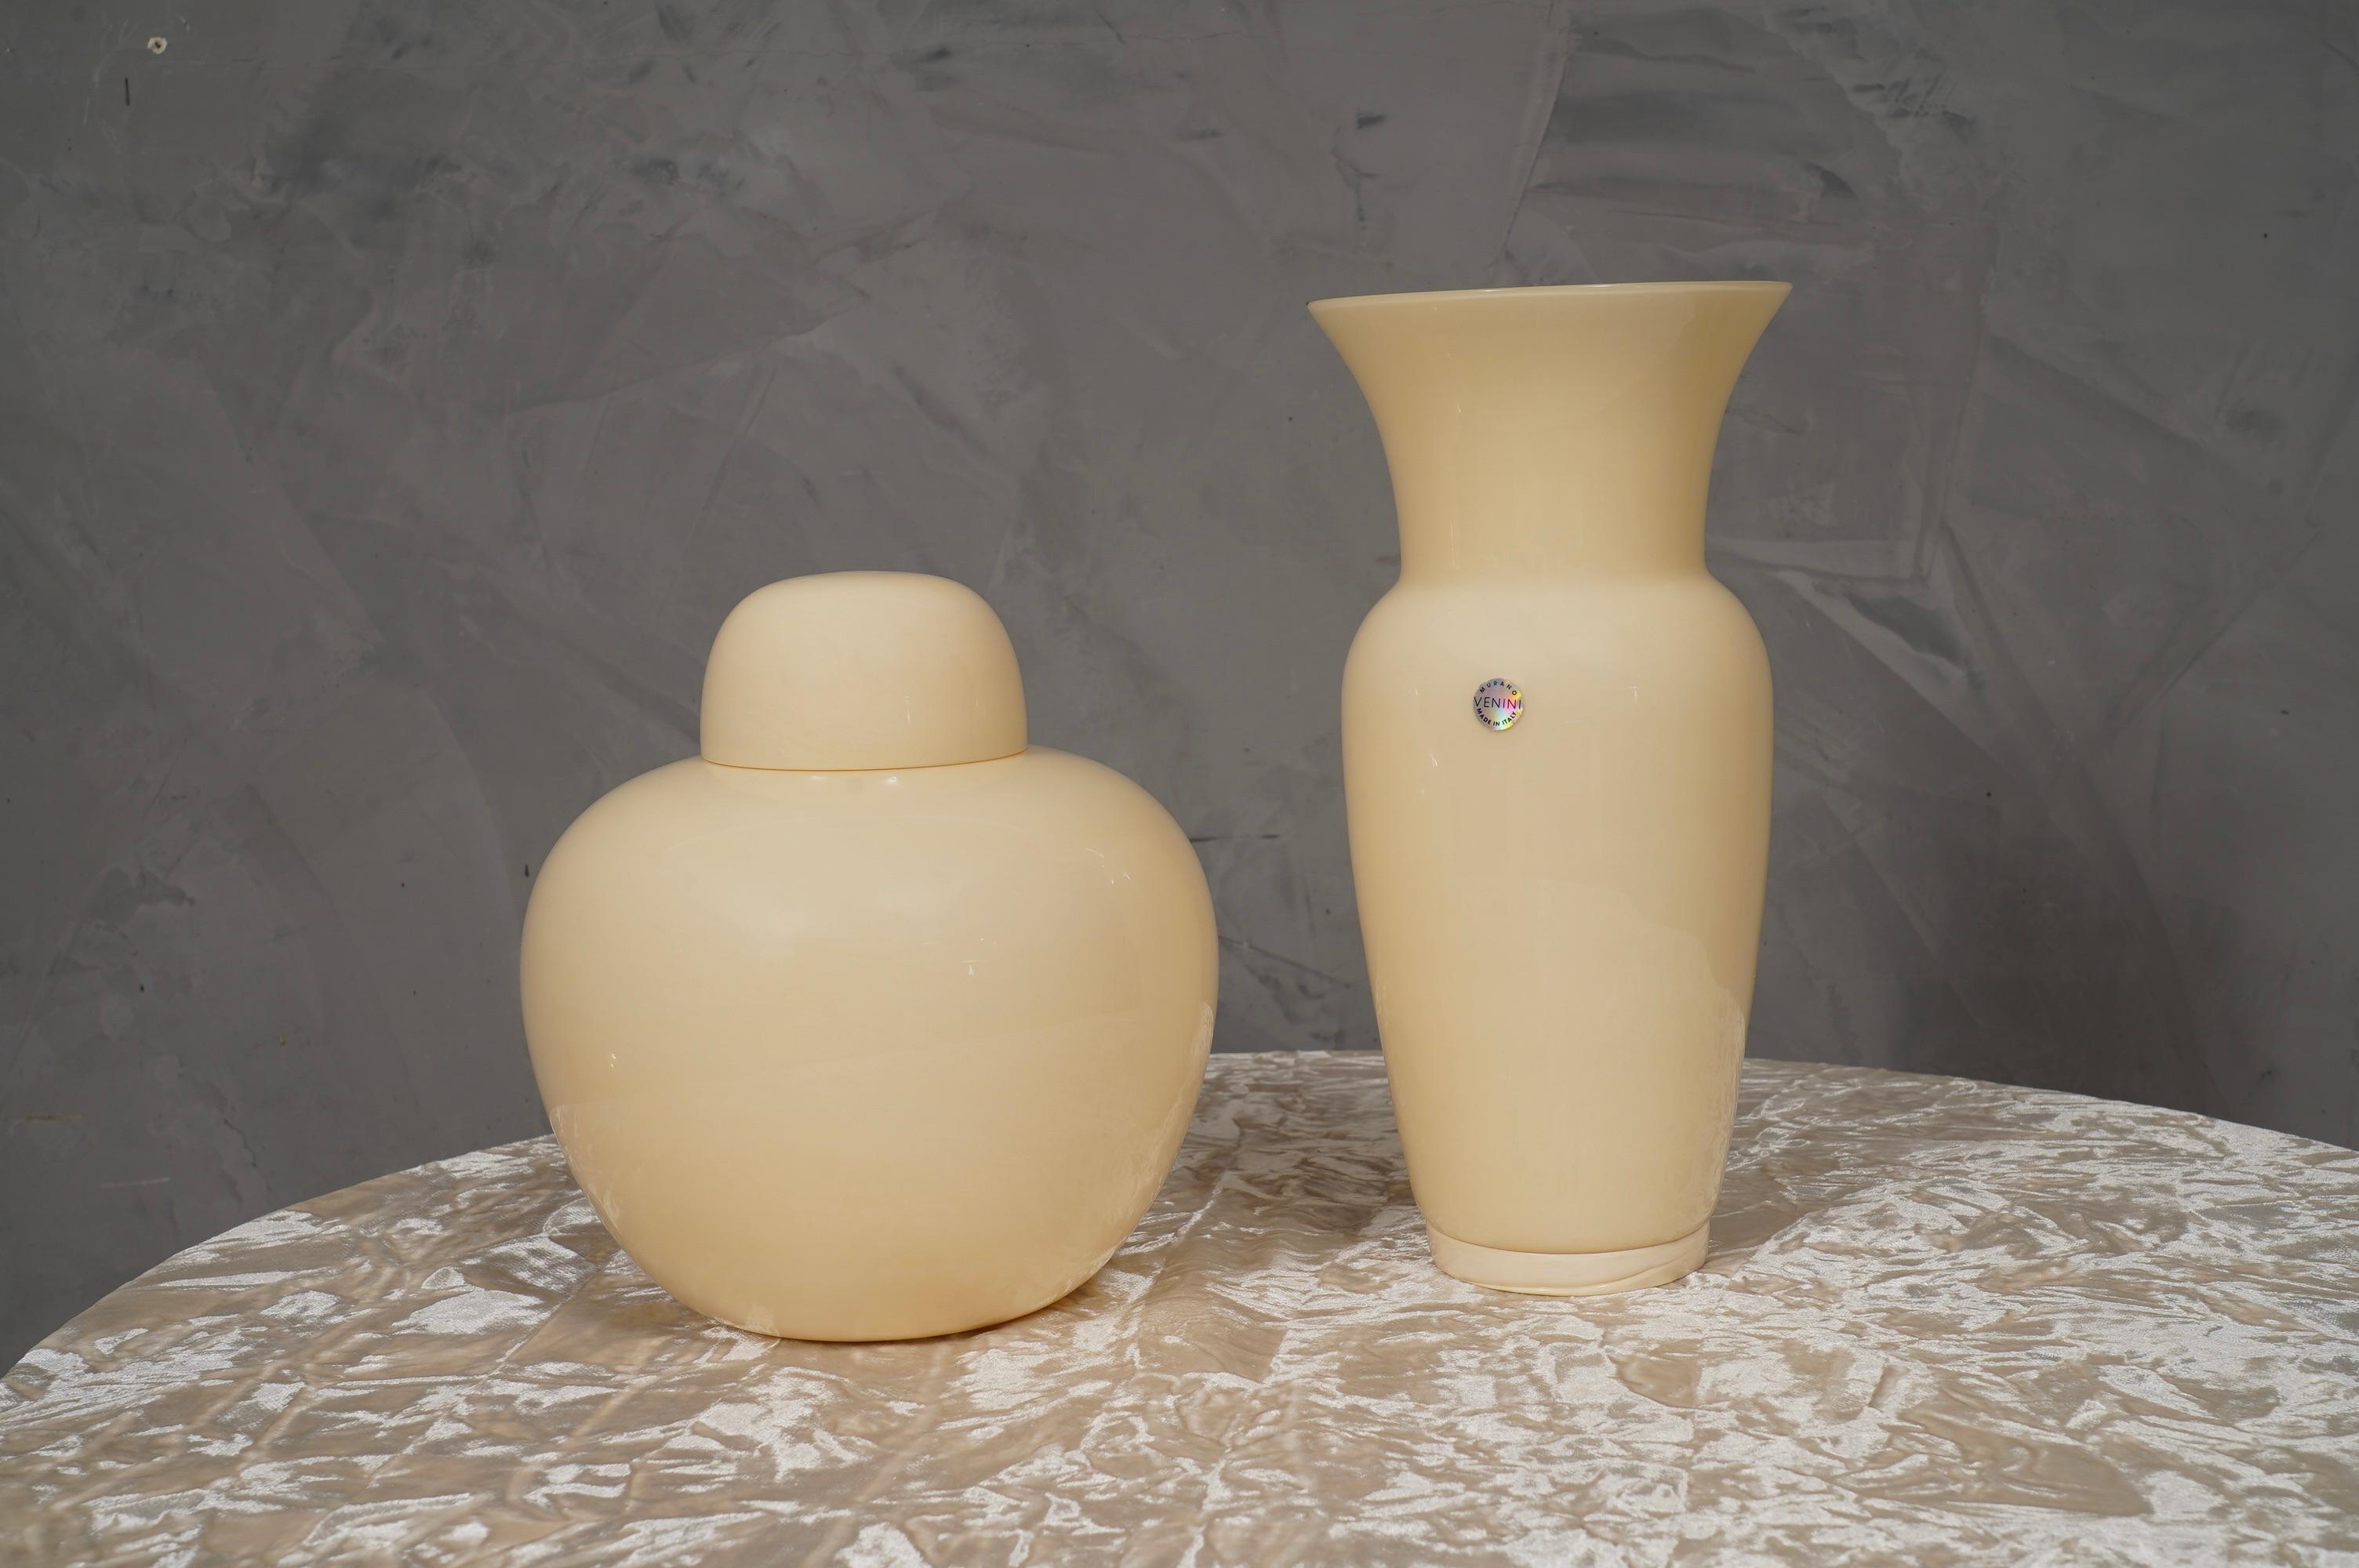 With its unique features and meticulous attention to detail, this object is a testament to Tobia Scarpa's innovative vision and artistic sensibility.

The small jar is in ivory opal Murano glass, meticulously manufactured by Venini, vase with lid